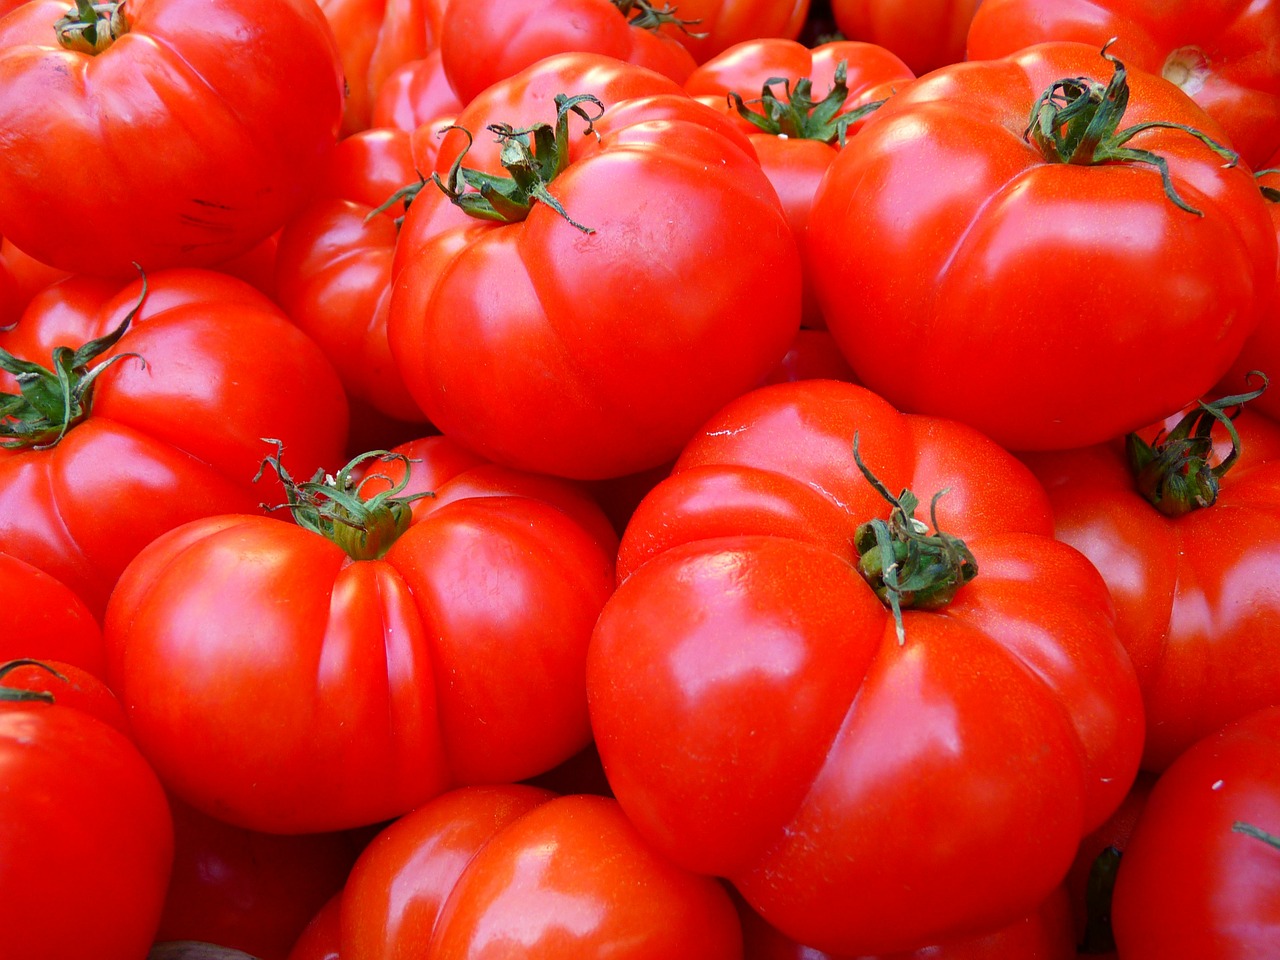 Here Are 20 General Knowledge Questions — How Many Can You Answer Correctly? Tomatoes